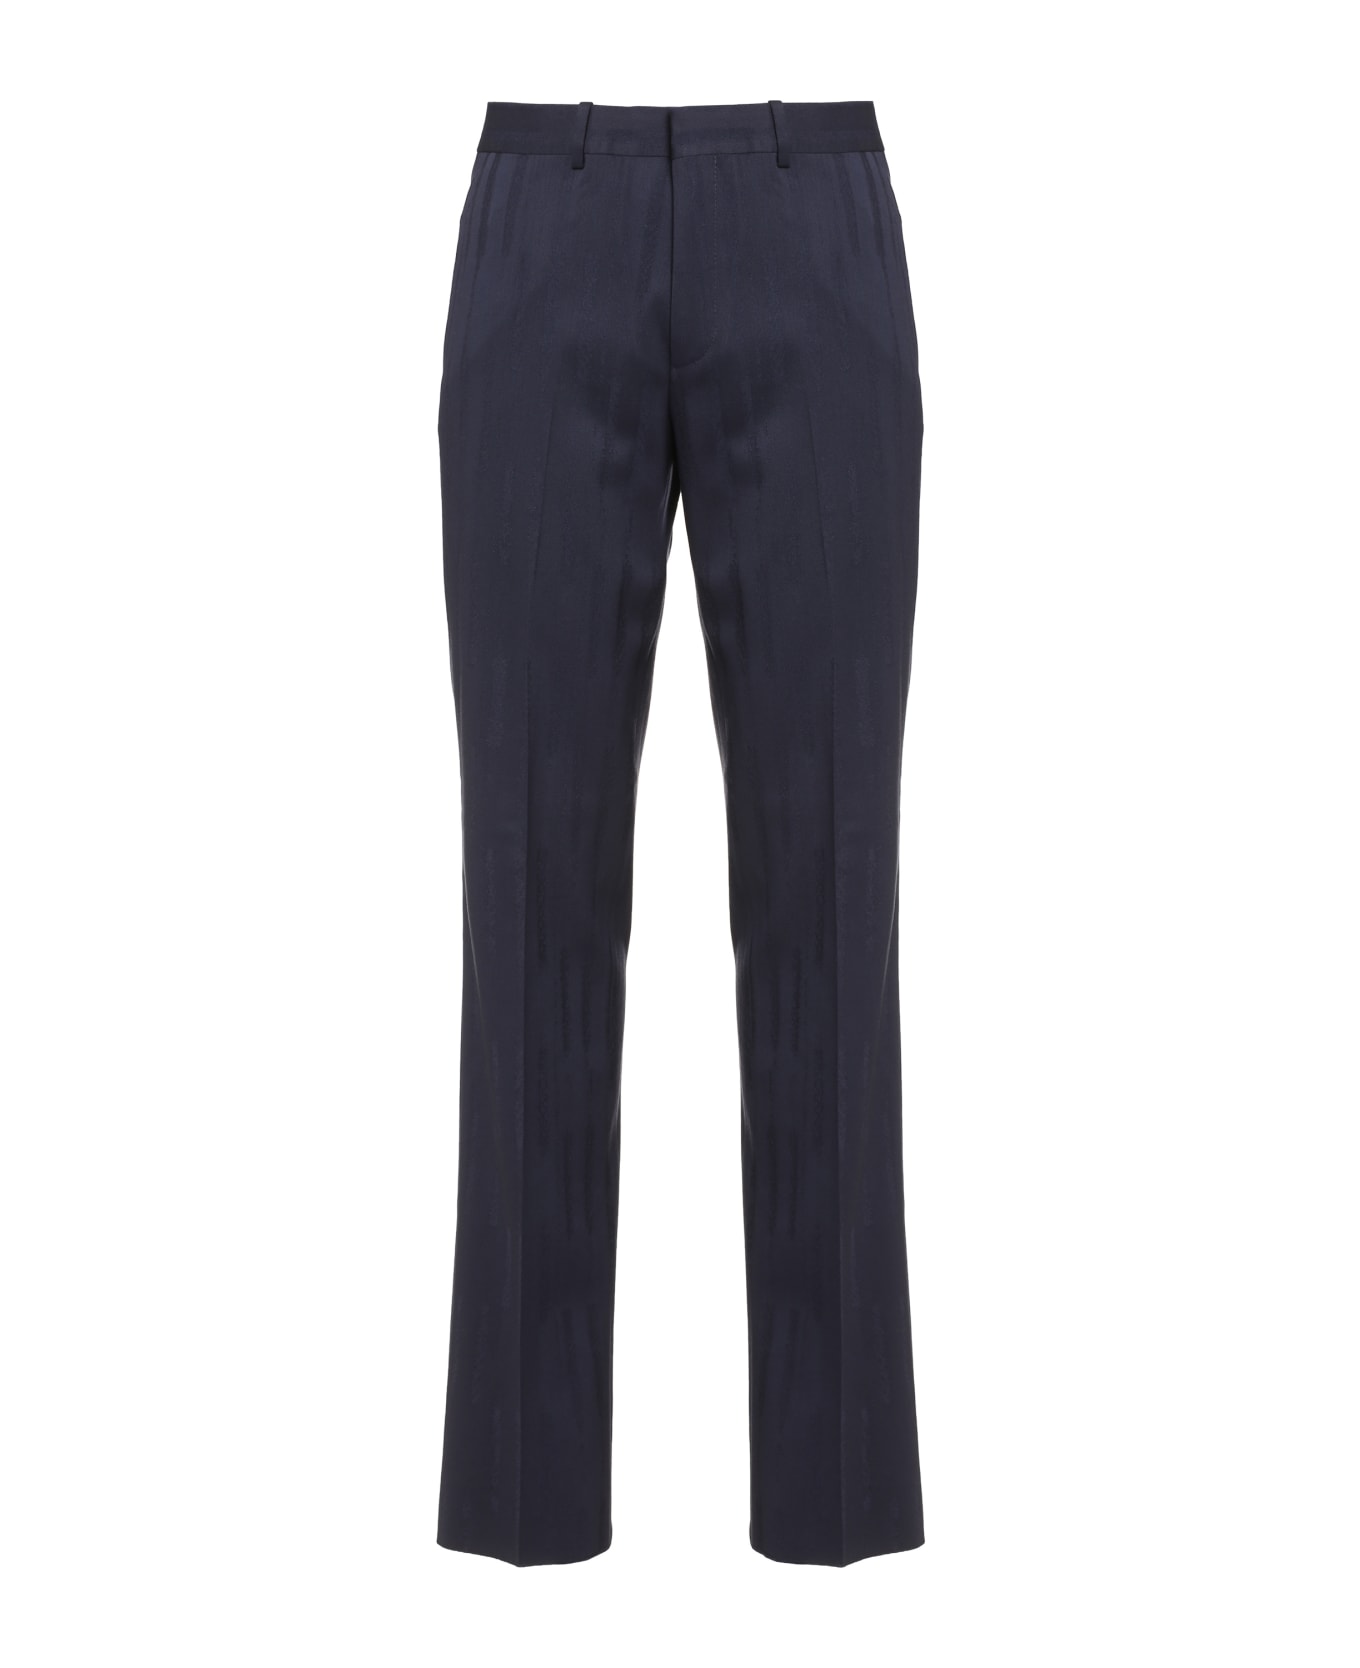 Off-White Slim Fit Tailored Trousers - blue ボトムス